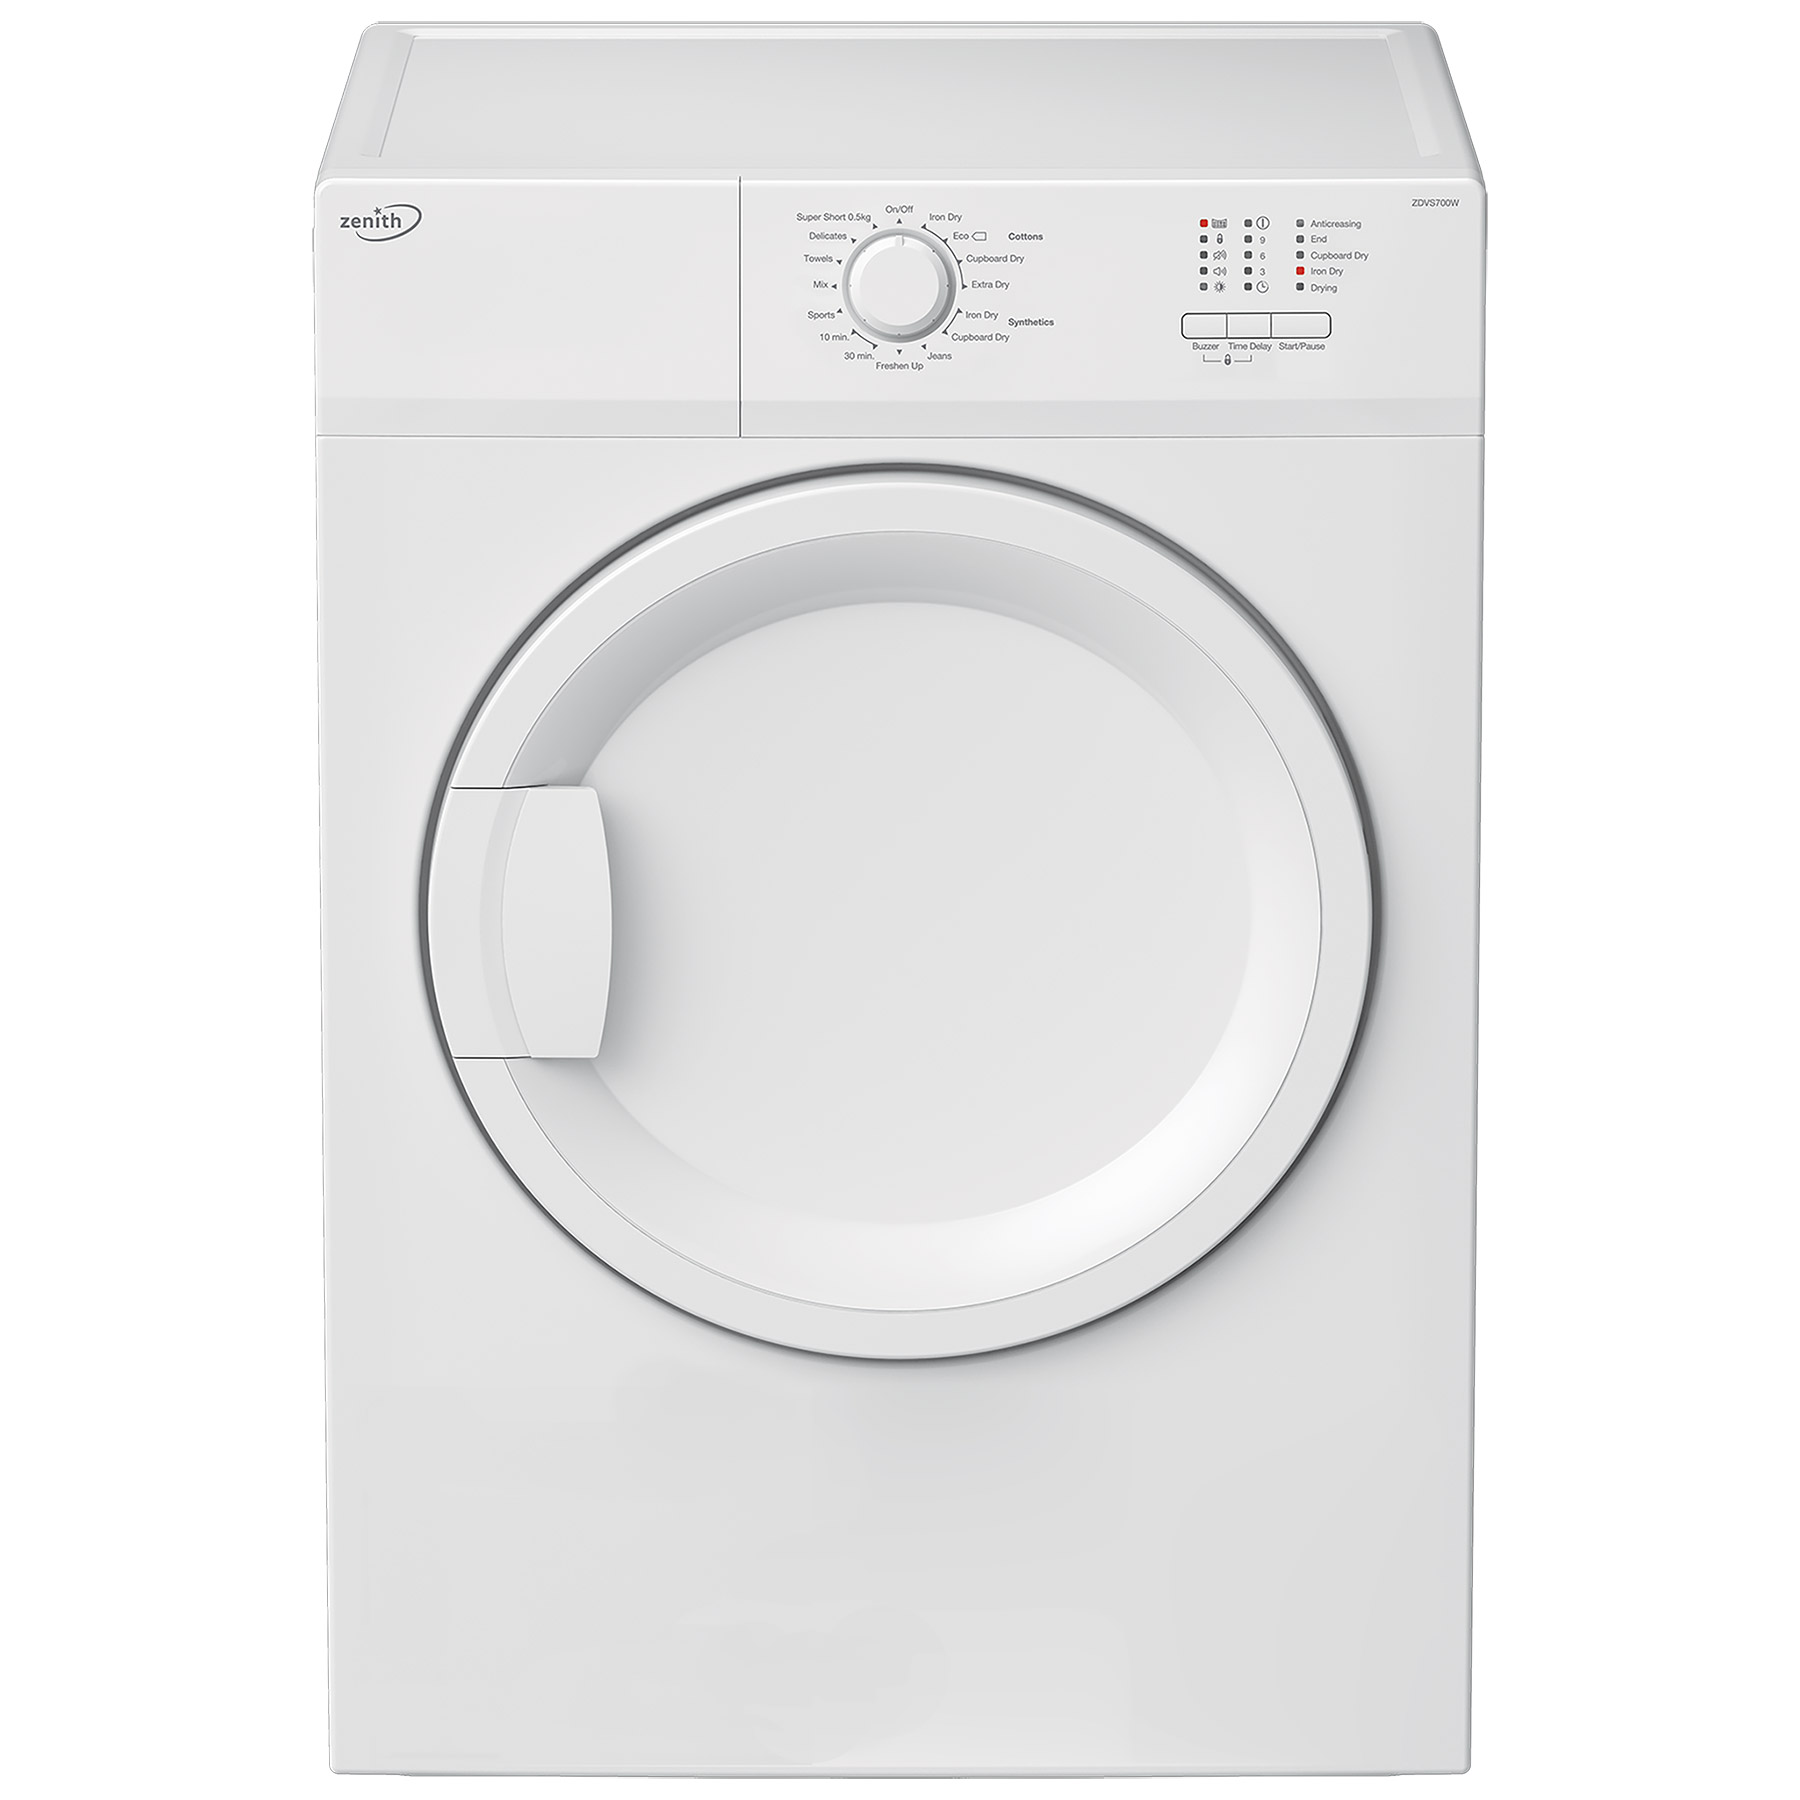 Image of Zenith ZDVS700W 7kg Vented Dryer in White C Rated Sensor